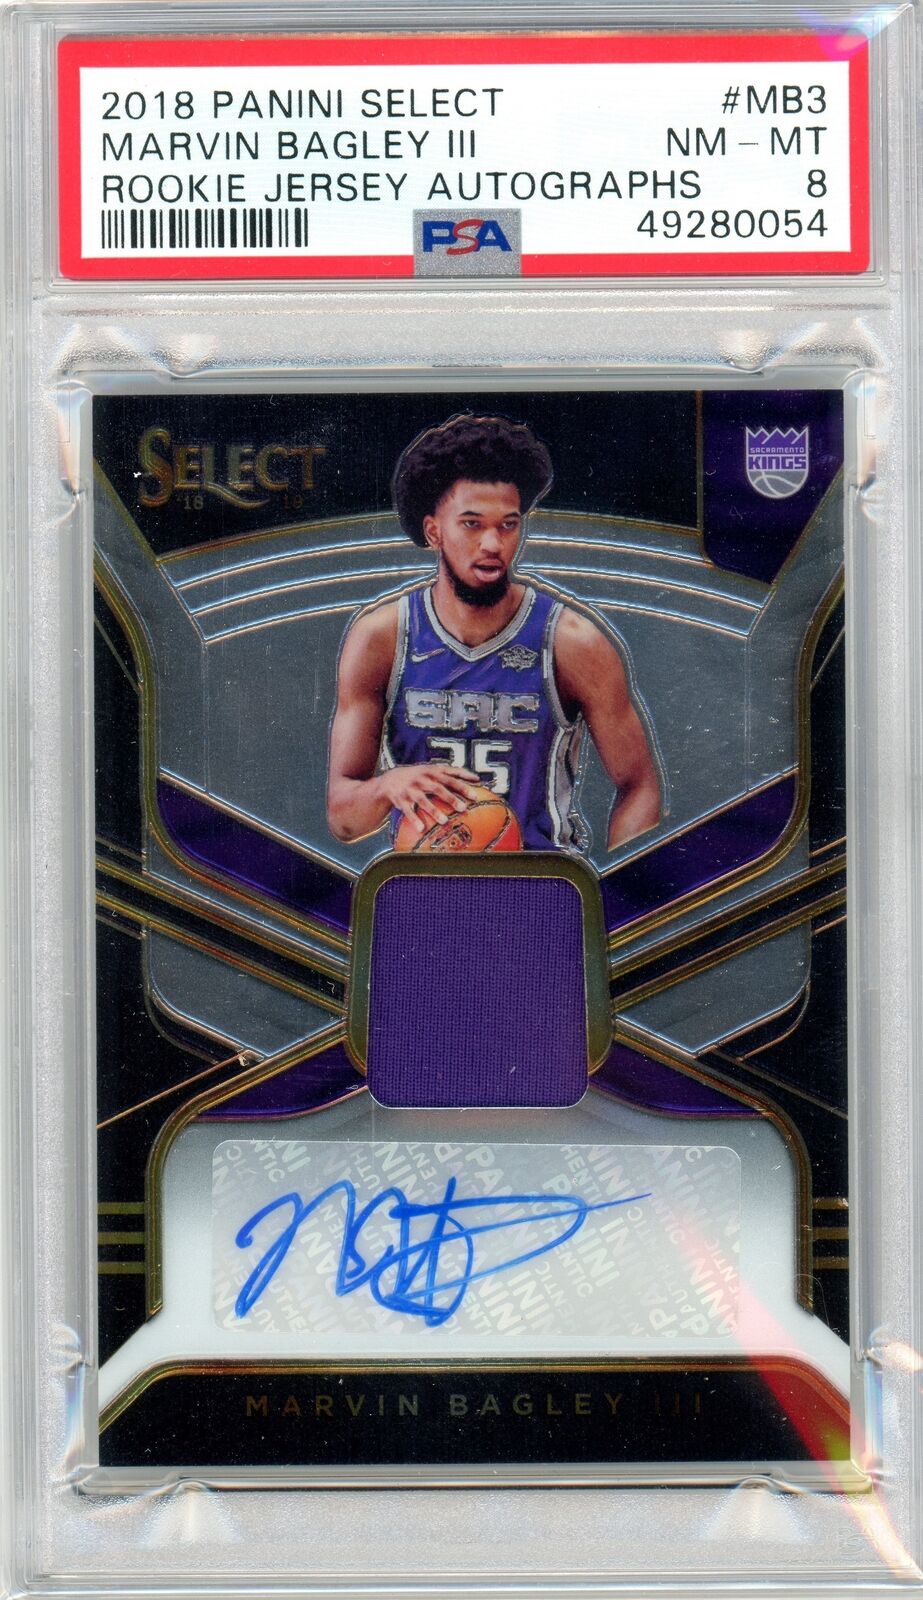 PSA 10 Marvin Bagley III Patch + Auto // POP 2- card numbered 153/199 // 2018 Pa